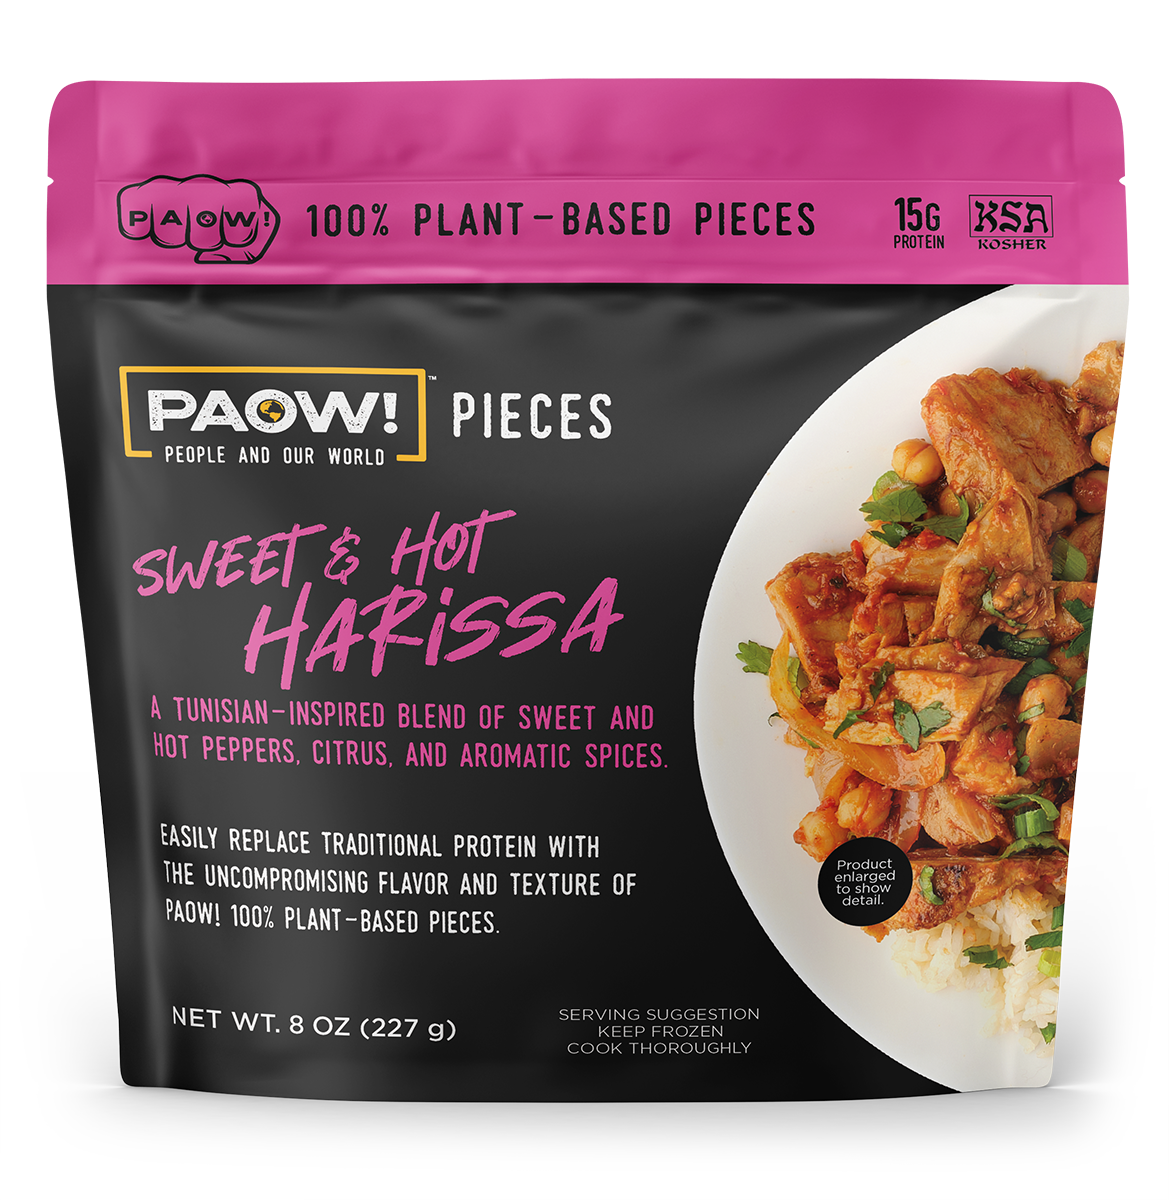 PAOW! Sweet & Hot Harissa Pieces - Retails